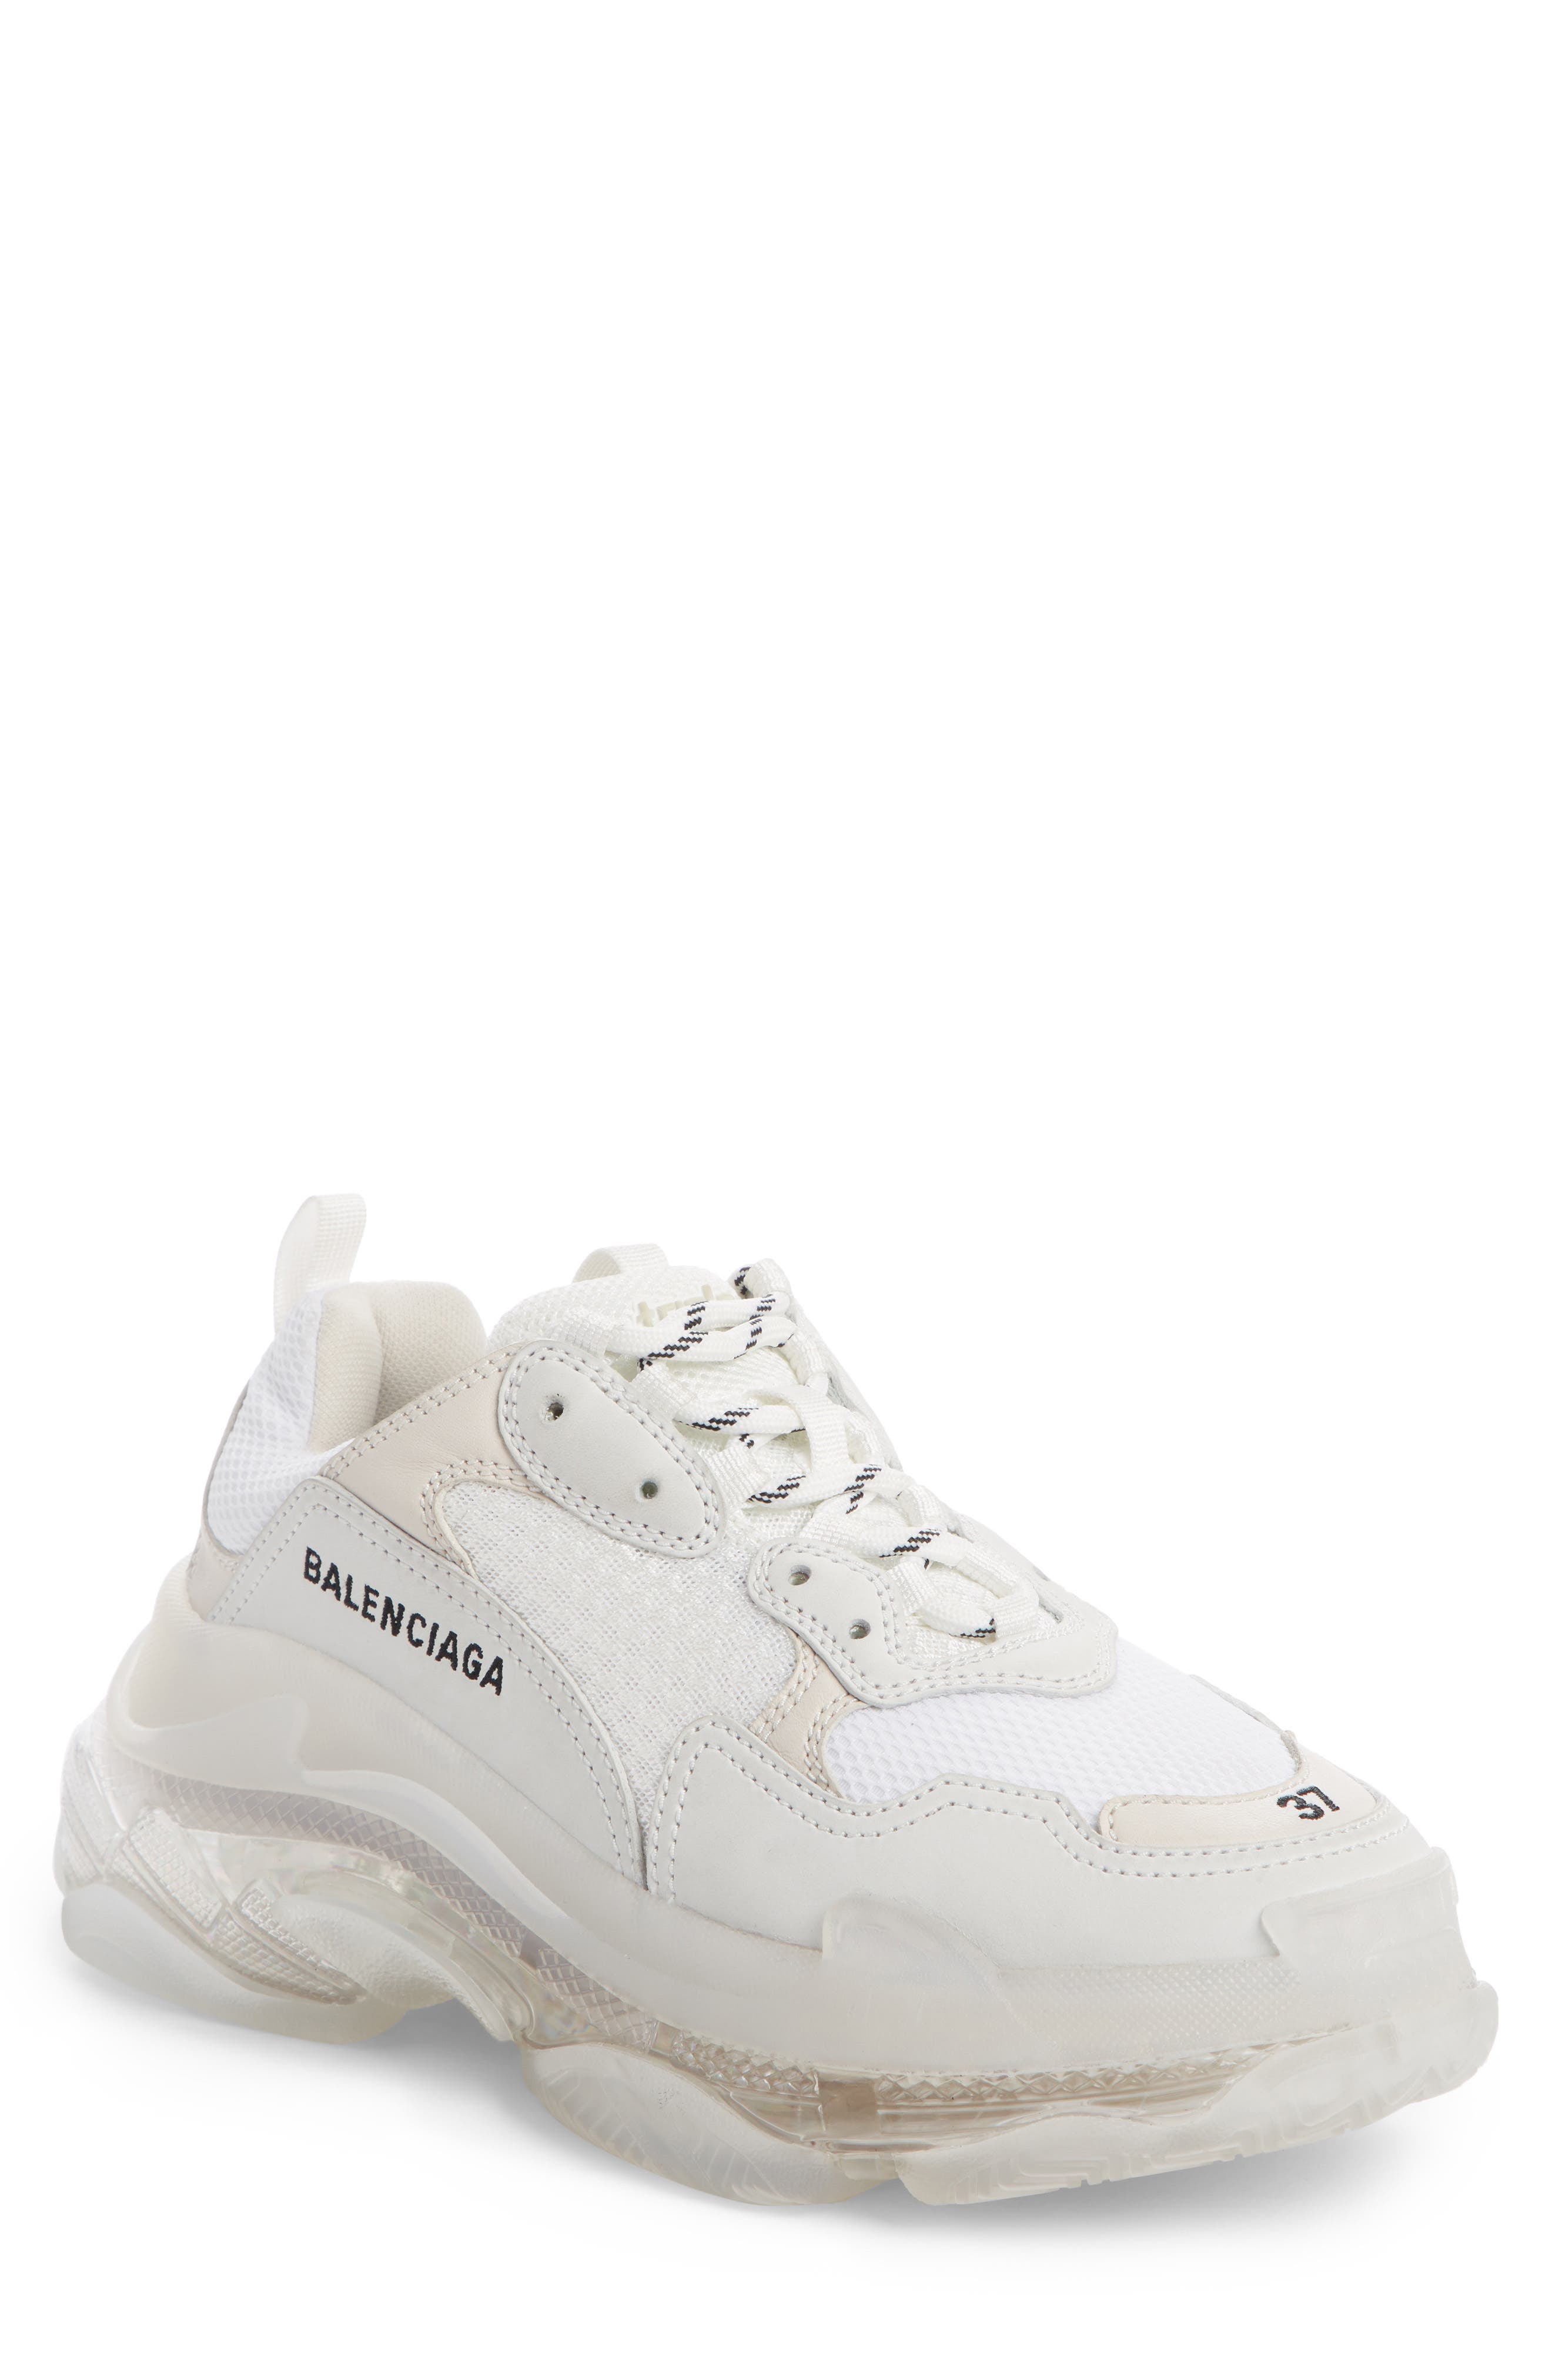 Black Triple S Leather and Mesh Sneakers Balenciaga MR